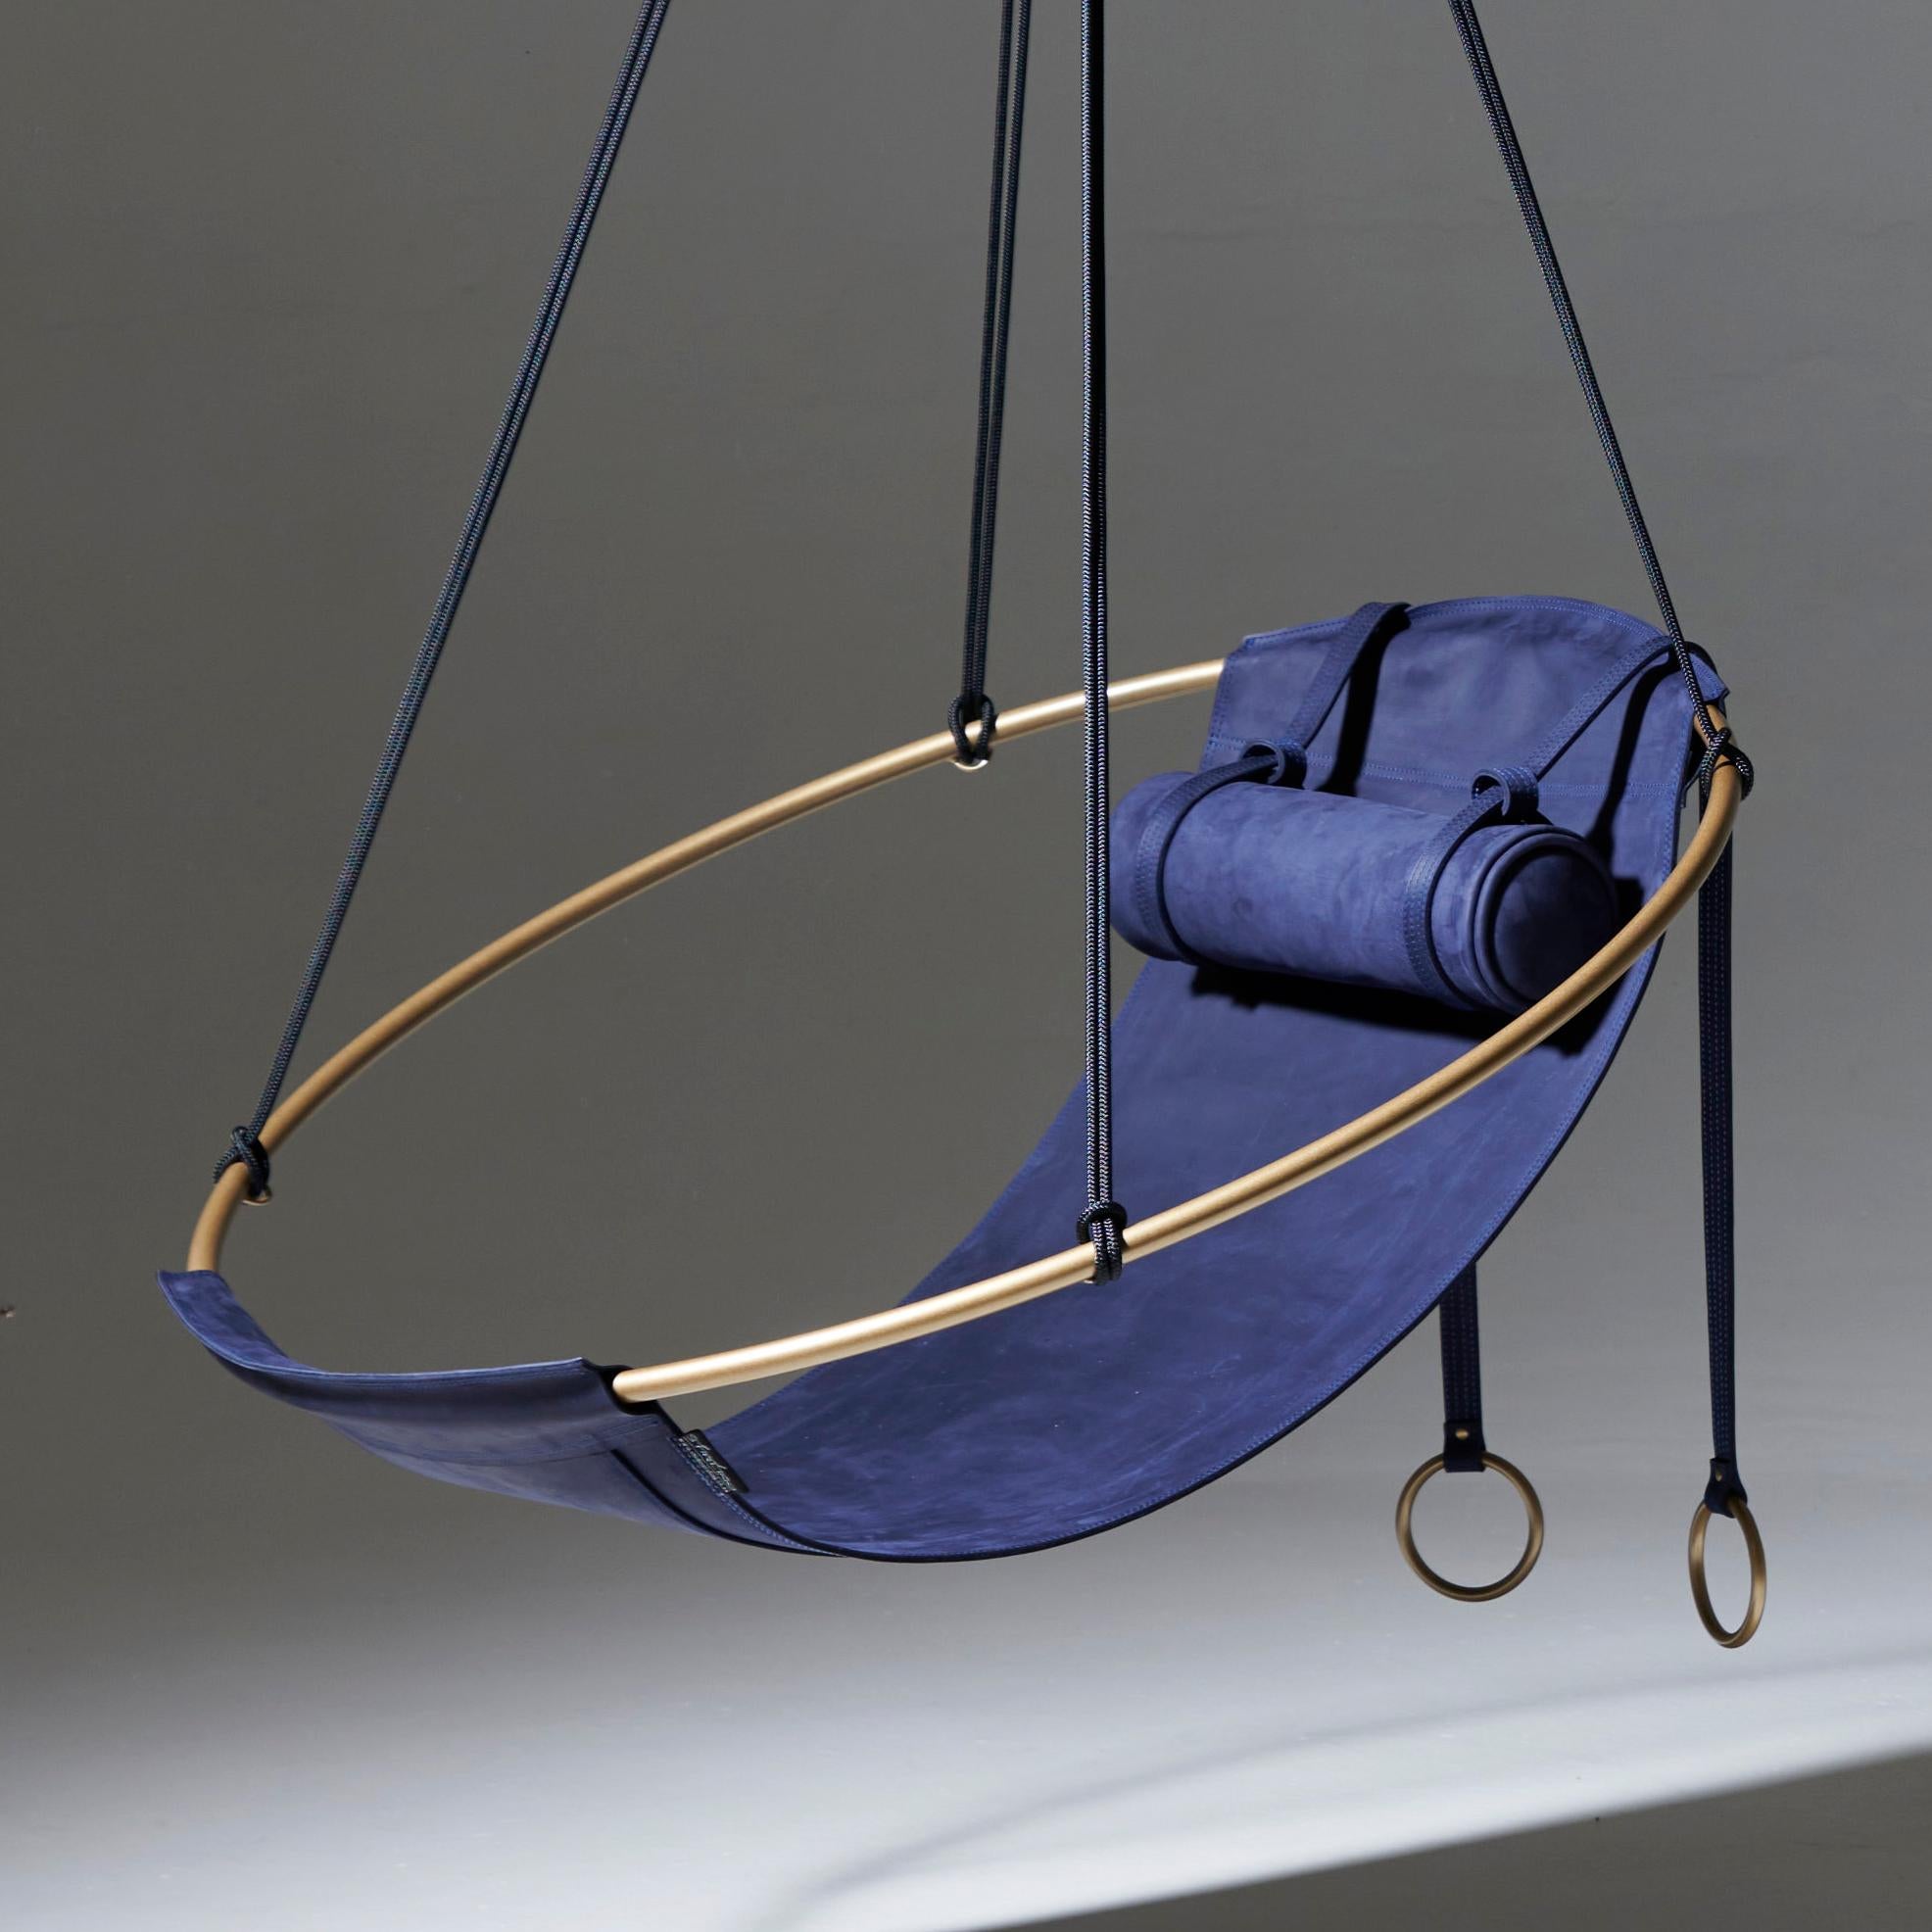 South African Minimal Modern One of a Kind Blue and Gold Sling Hanging Swing Chair